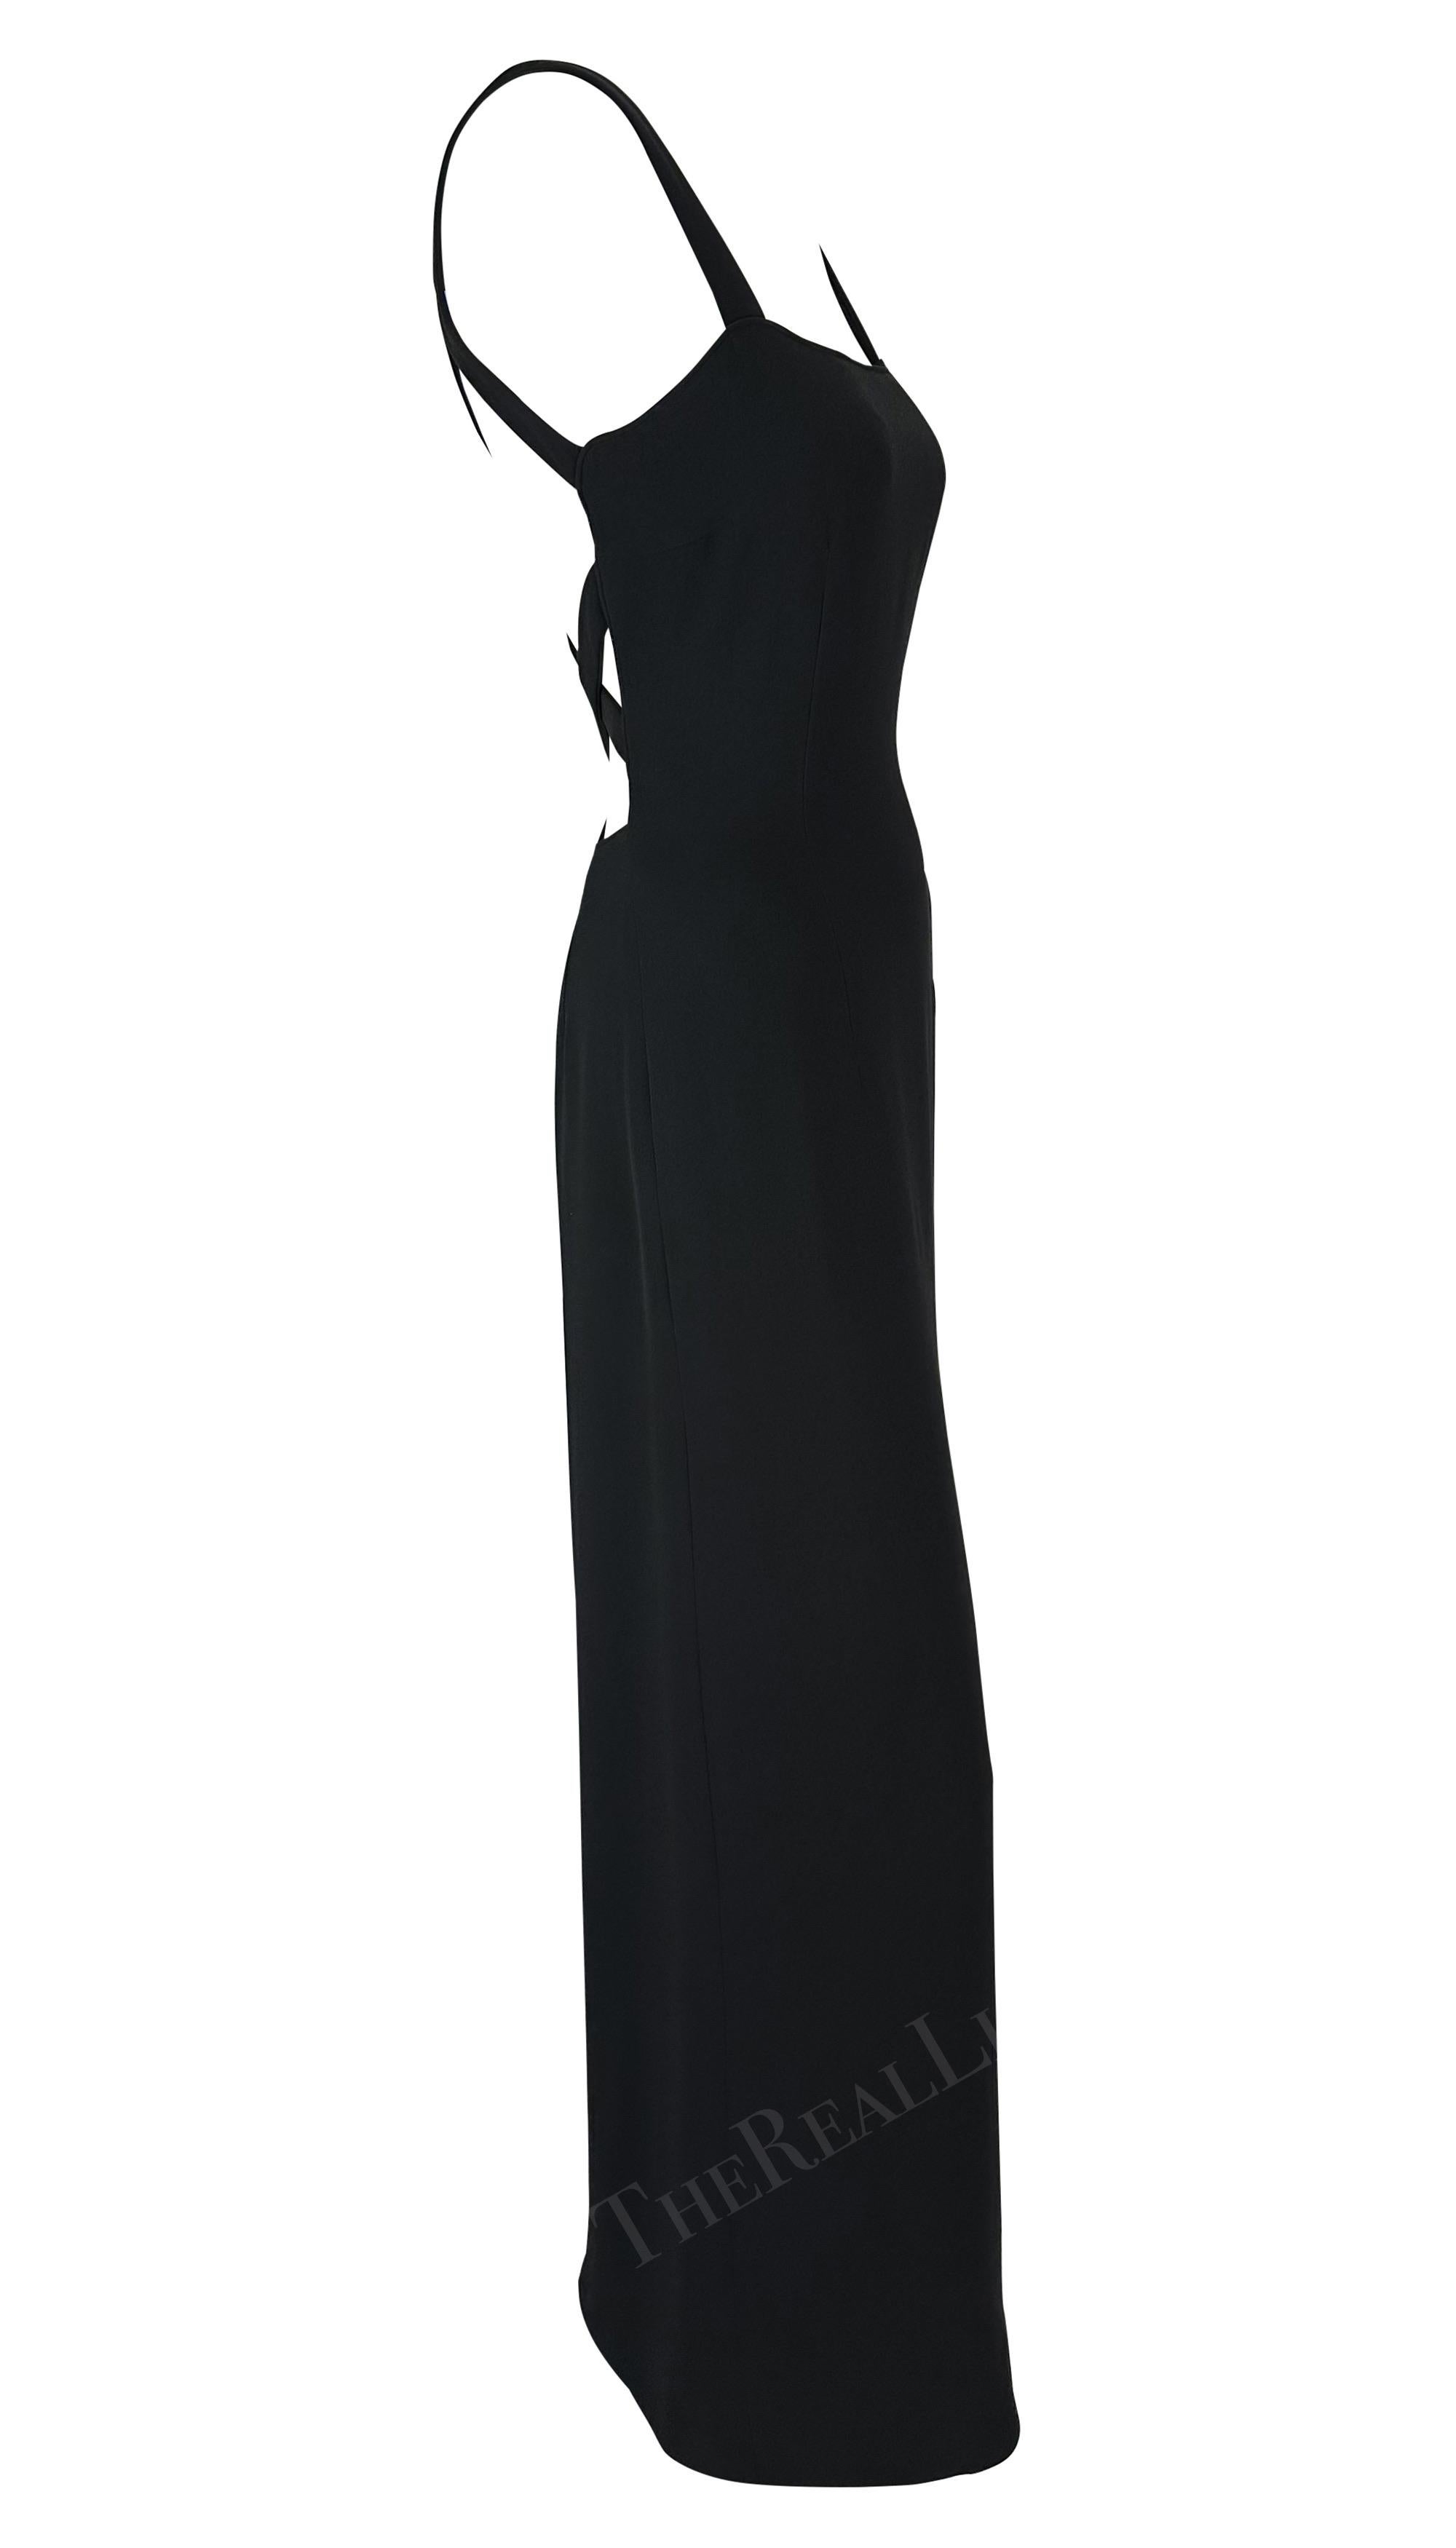 Late 1990s Giorgio Armani Black Backless Bodycon Stretch Strap Gown In Excellent Condition For Sale In West Hollywood, CA